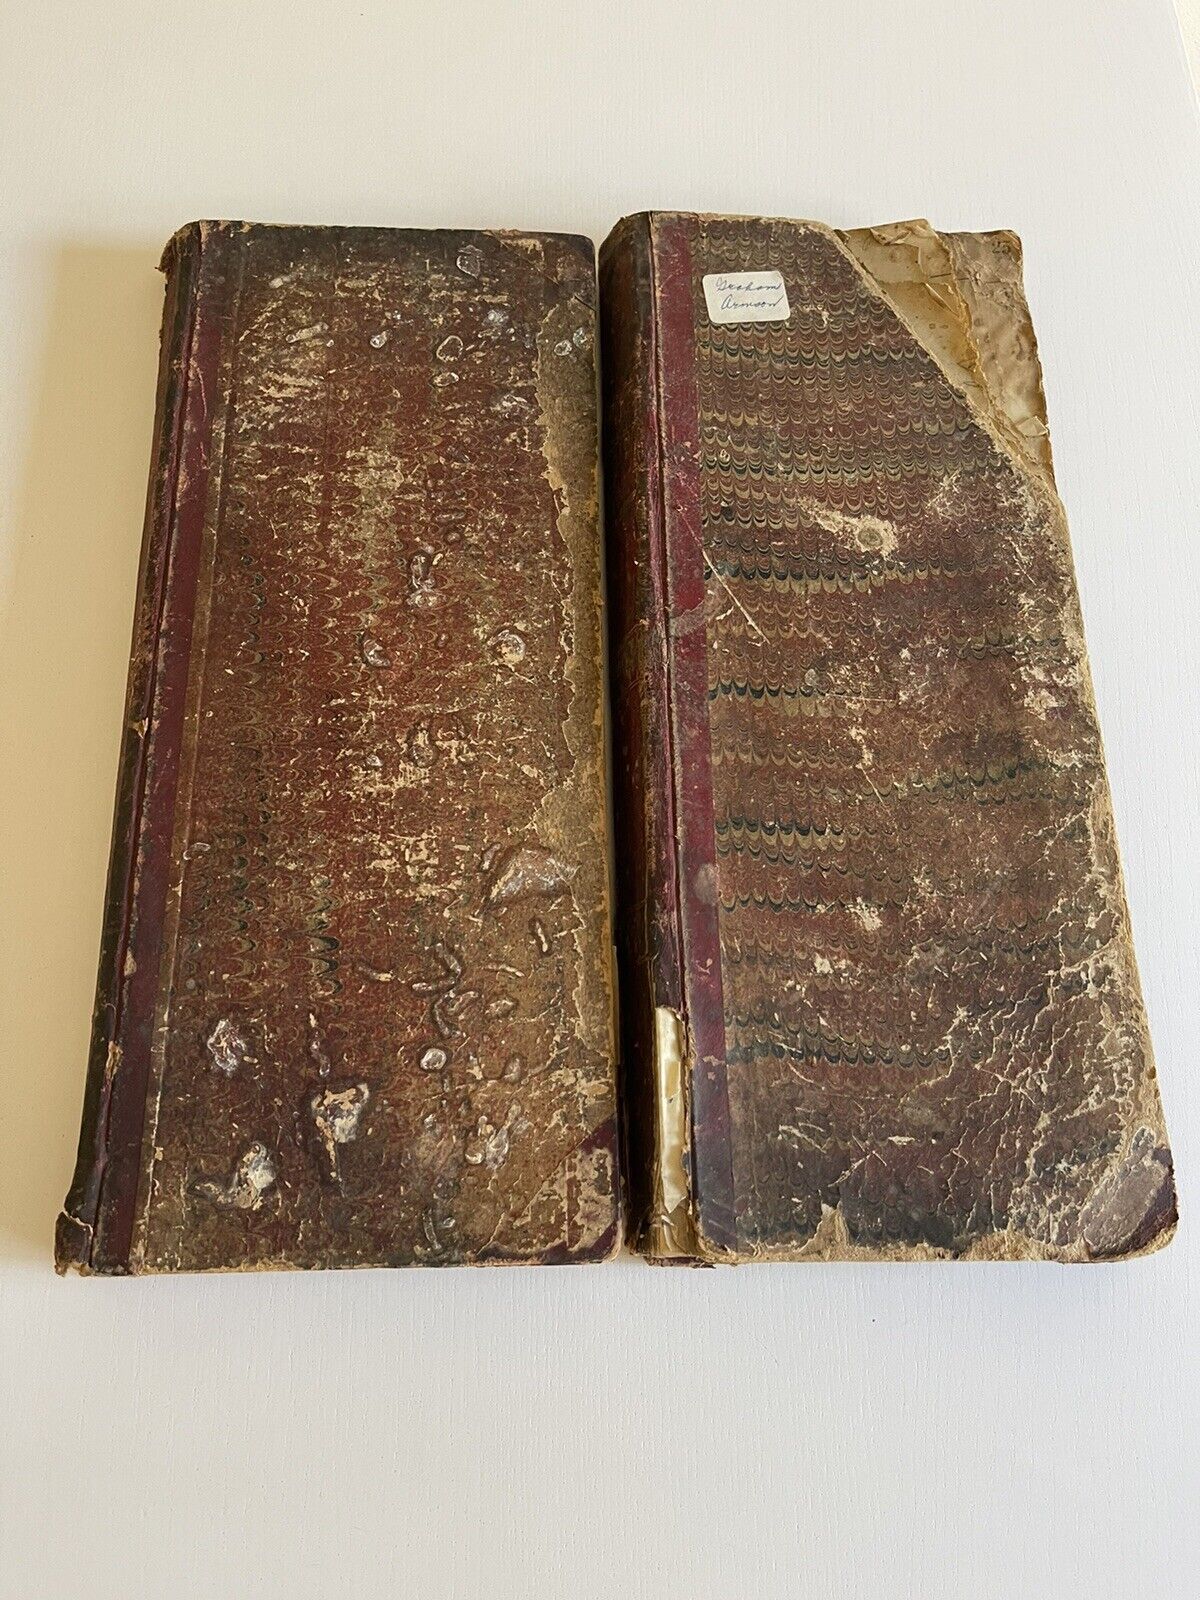 Handwritten Ledger 1874 & 1880 Both Books filled with writing